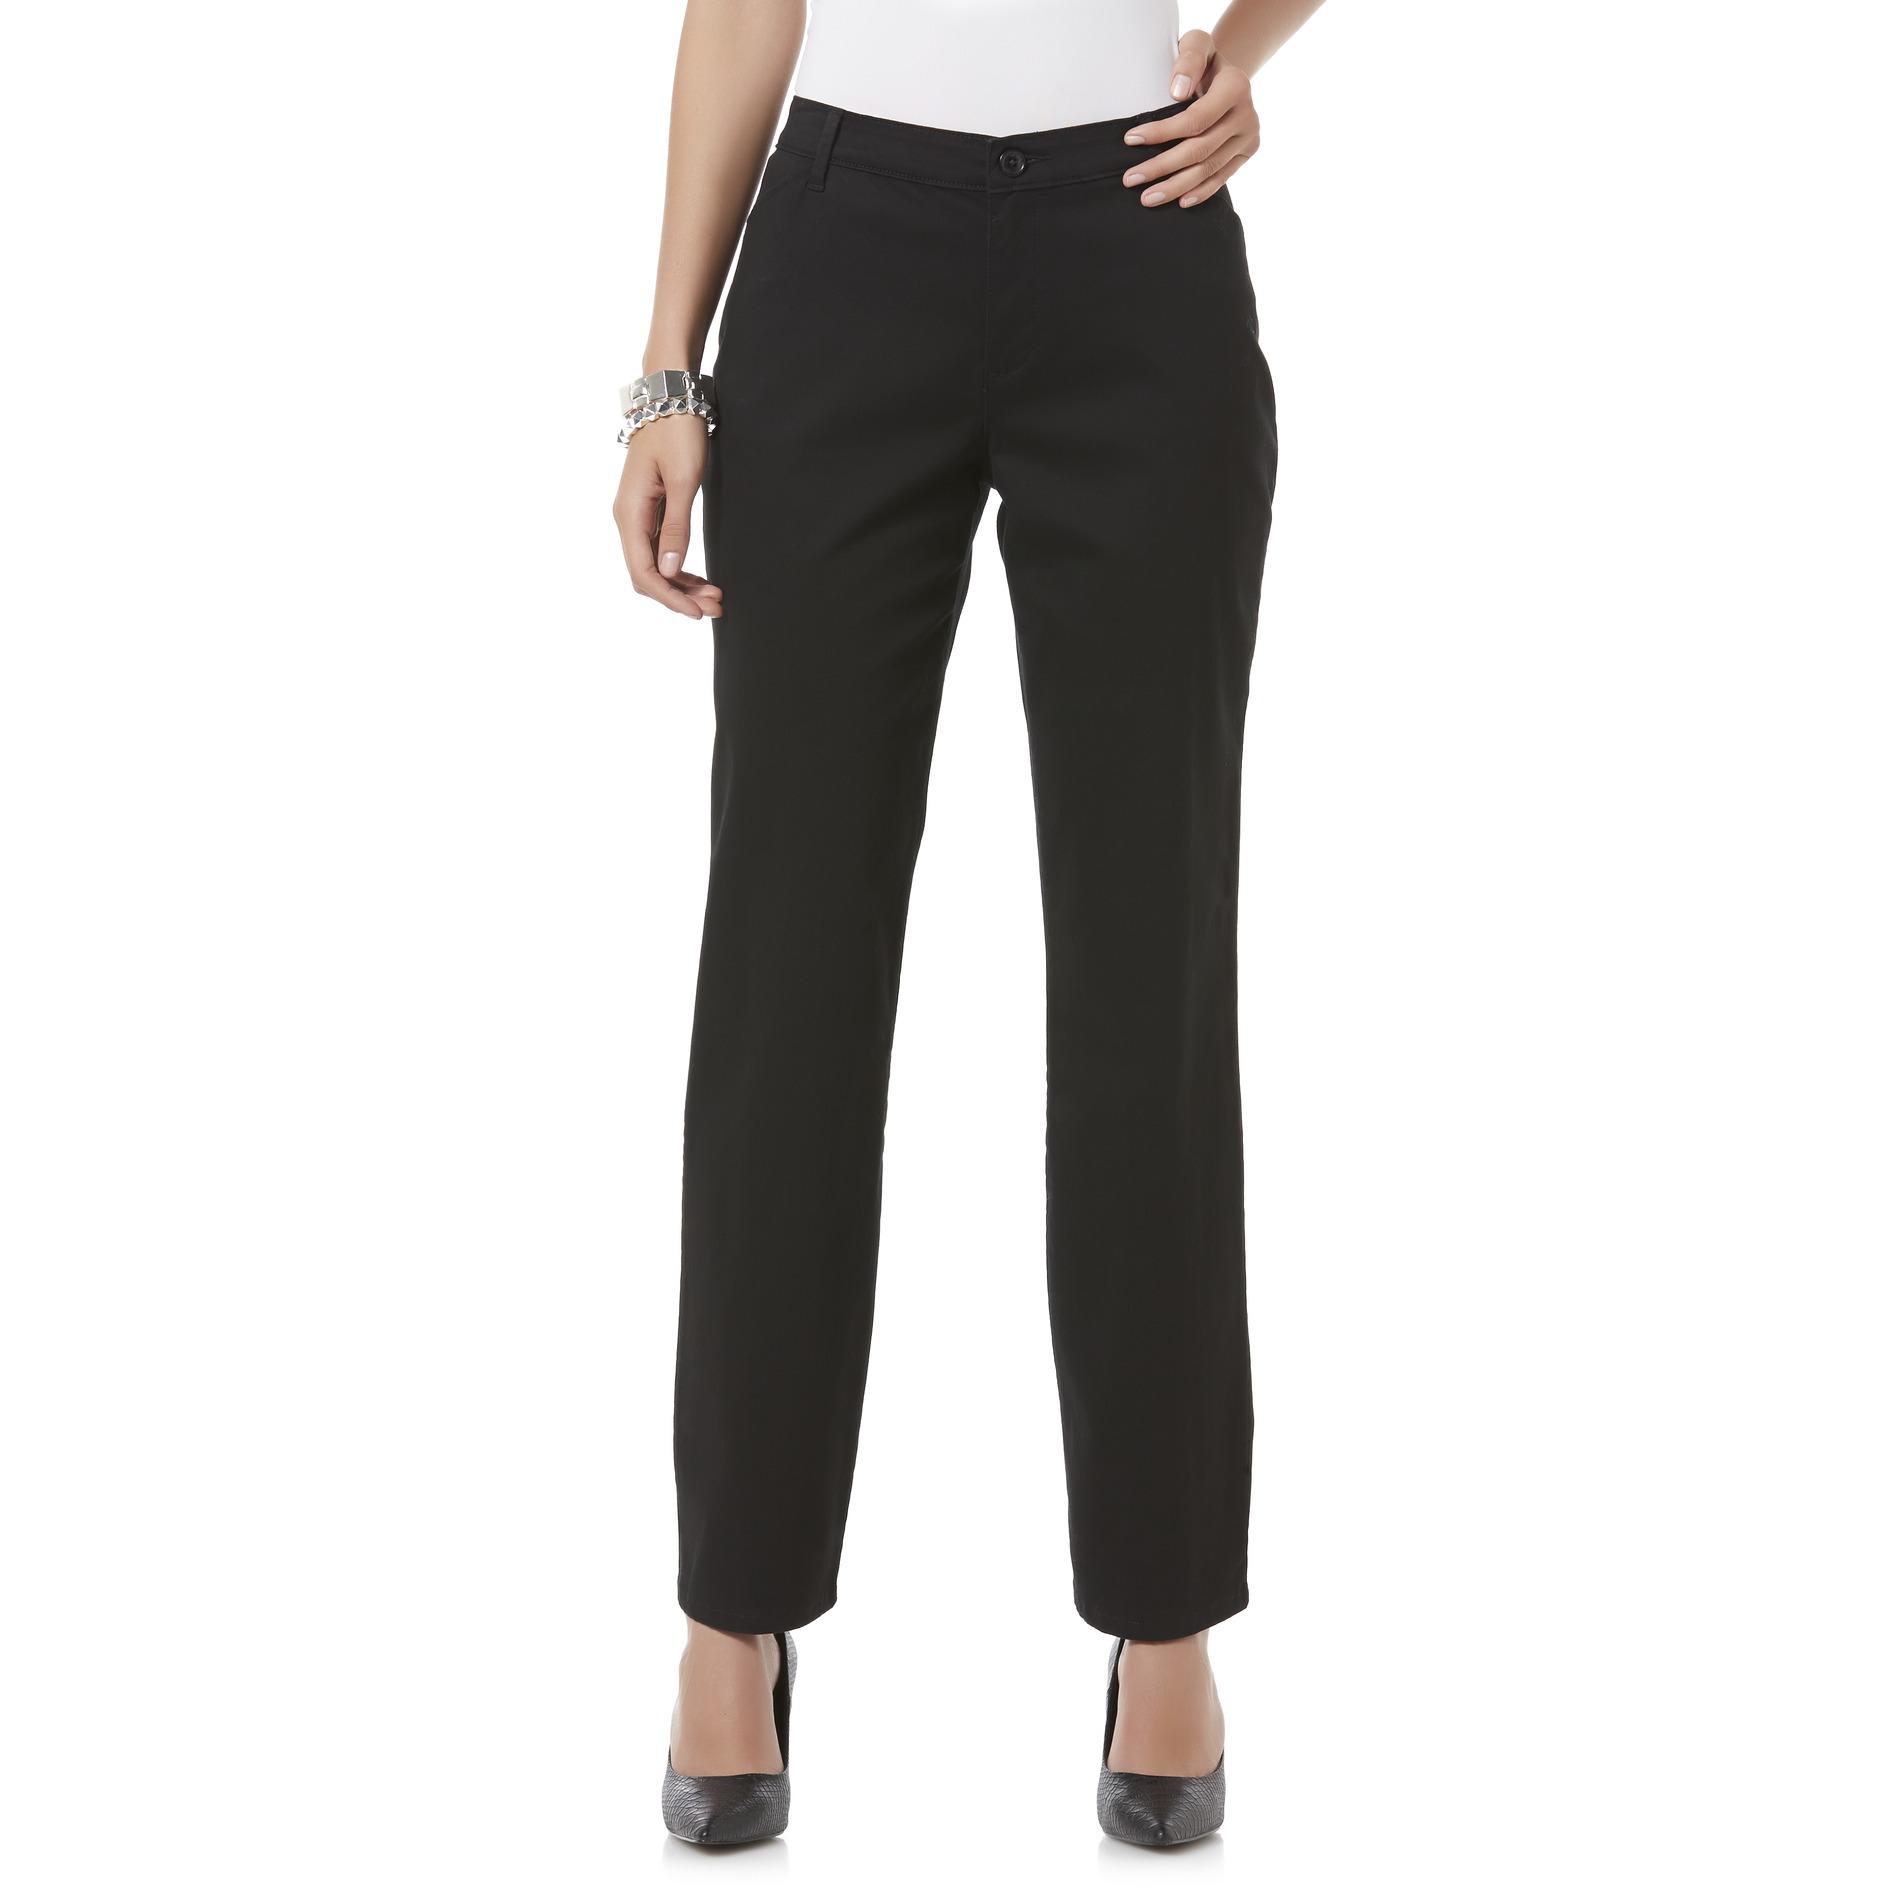 LEE Women's Relaxed-Fit All Day Workwear Knit Pants